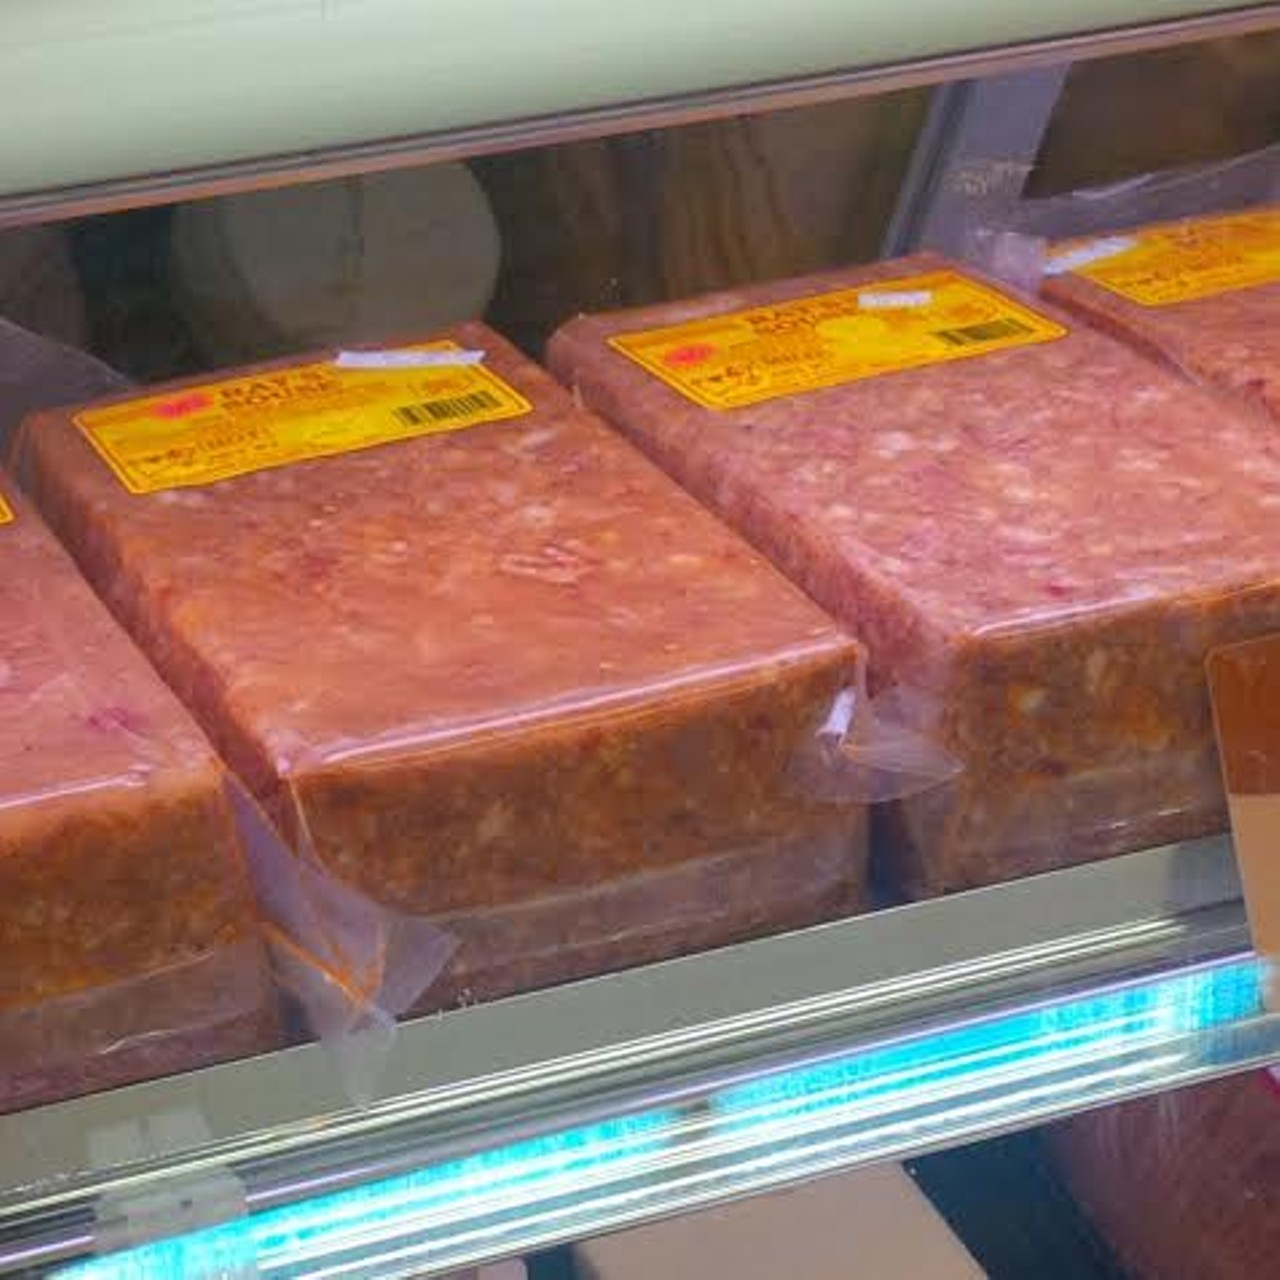 A local and TV legend, Ray's Sausage is famous for its souse meat. Presented like a cold cut at the deli counter, souse meat is a combination of a pig's snoot, ear, and tongue balanced with some awesome spices. Trust us you will love this.